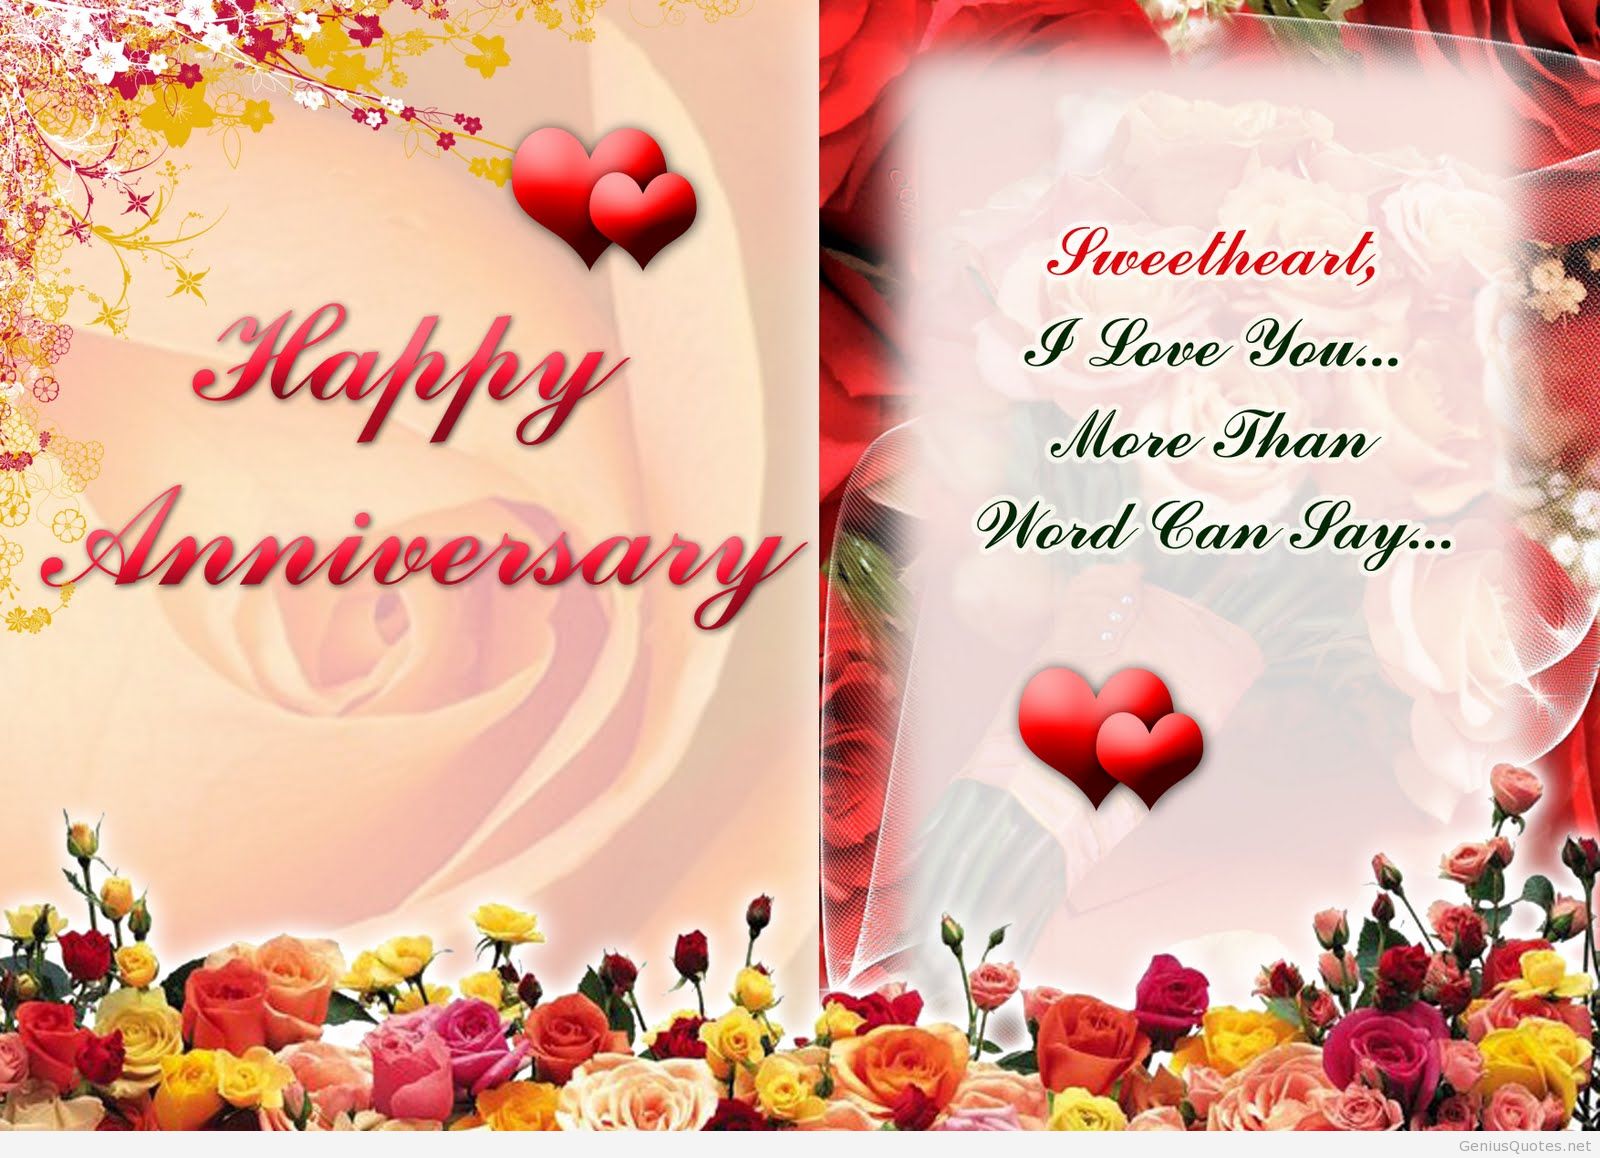 Happy Anniversary Hd Wallpaper With Quote Quote - Make Greeting Cards For  Anniversary - 1600x1158 Wallpaper 